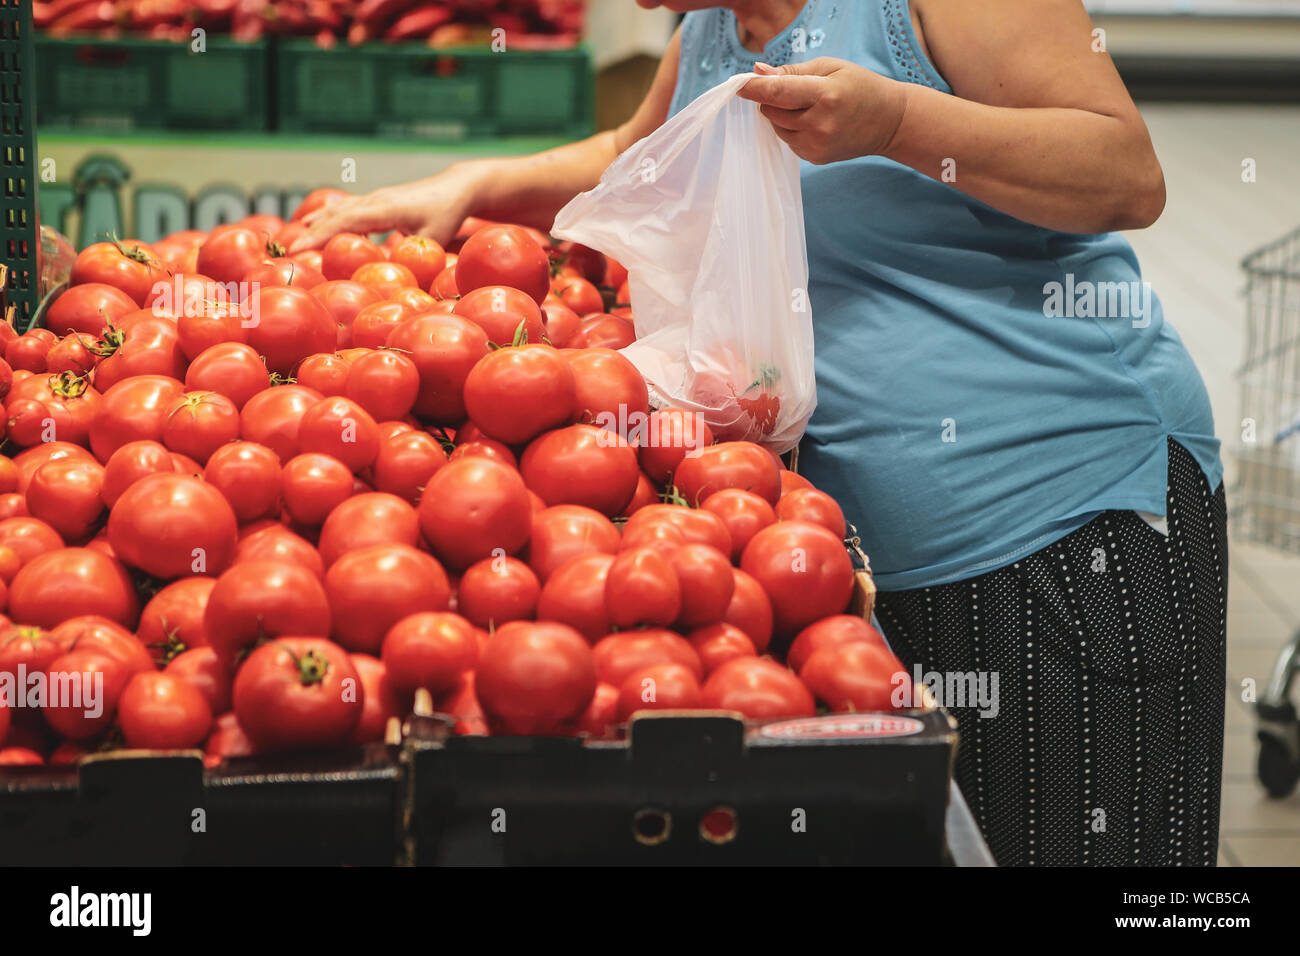 A woman uses biodegradable plastic food bags to buy fruits and vegetables from the supermarket Stock Photo